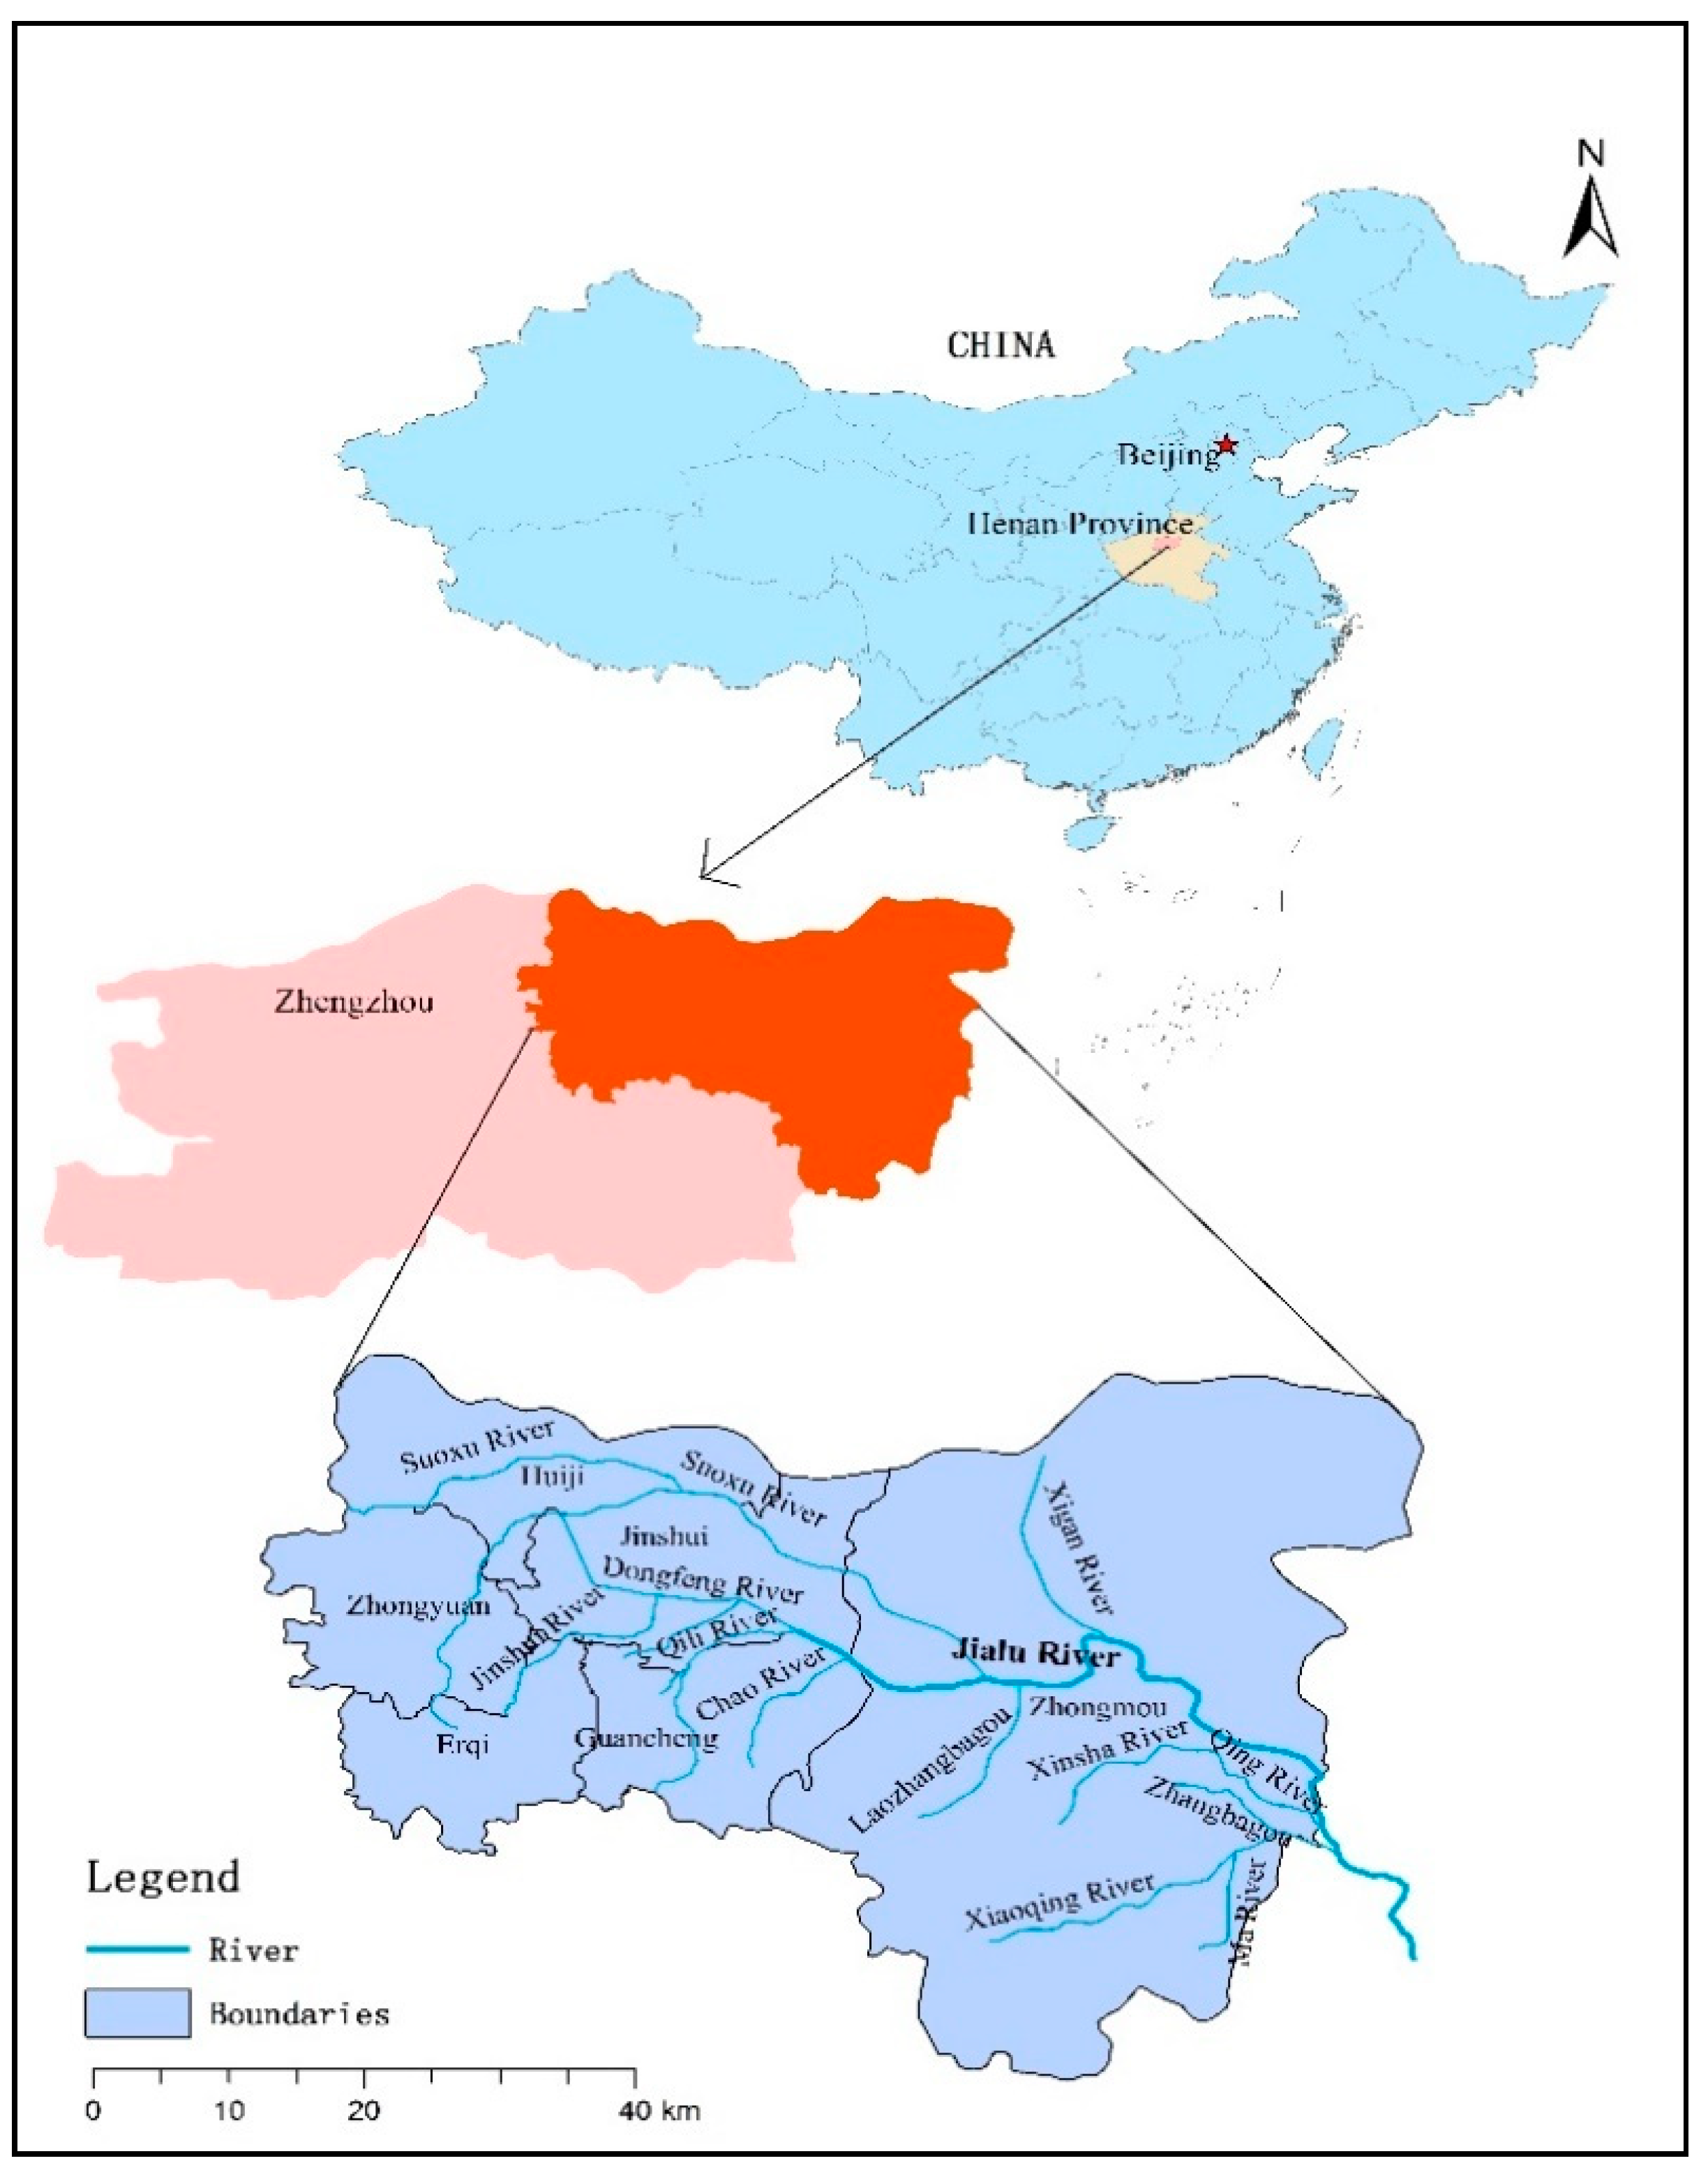 Water Free Full Text Urban River Health Analysis Of The Jialu River In Zhengzhou City Using The Improved Fuzzy Matter Element Extension Model Html